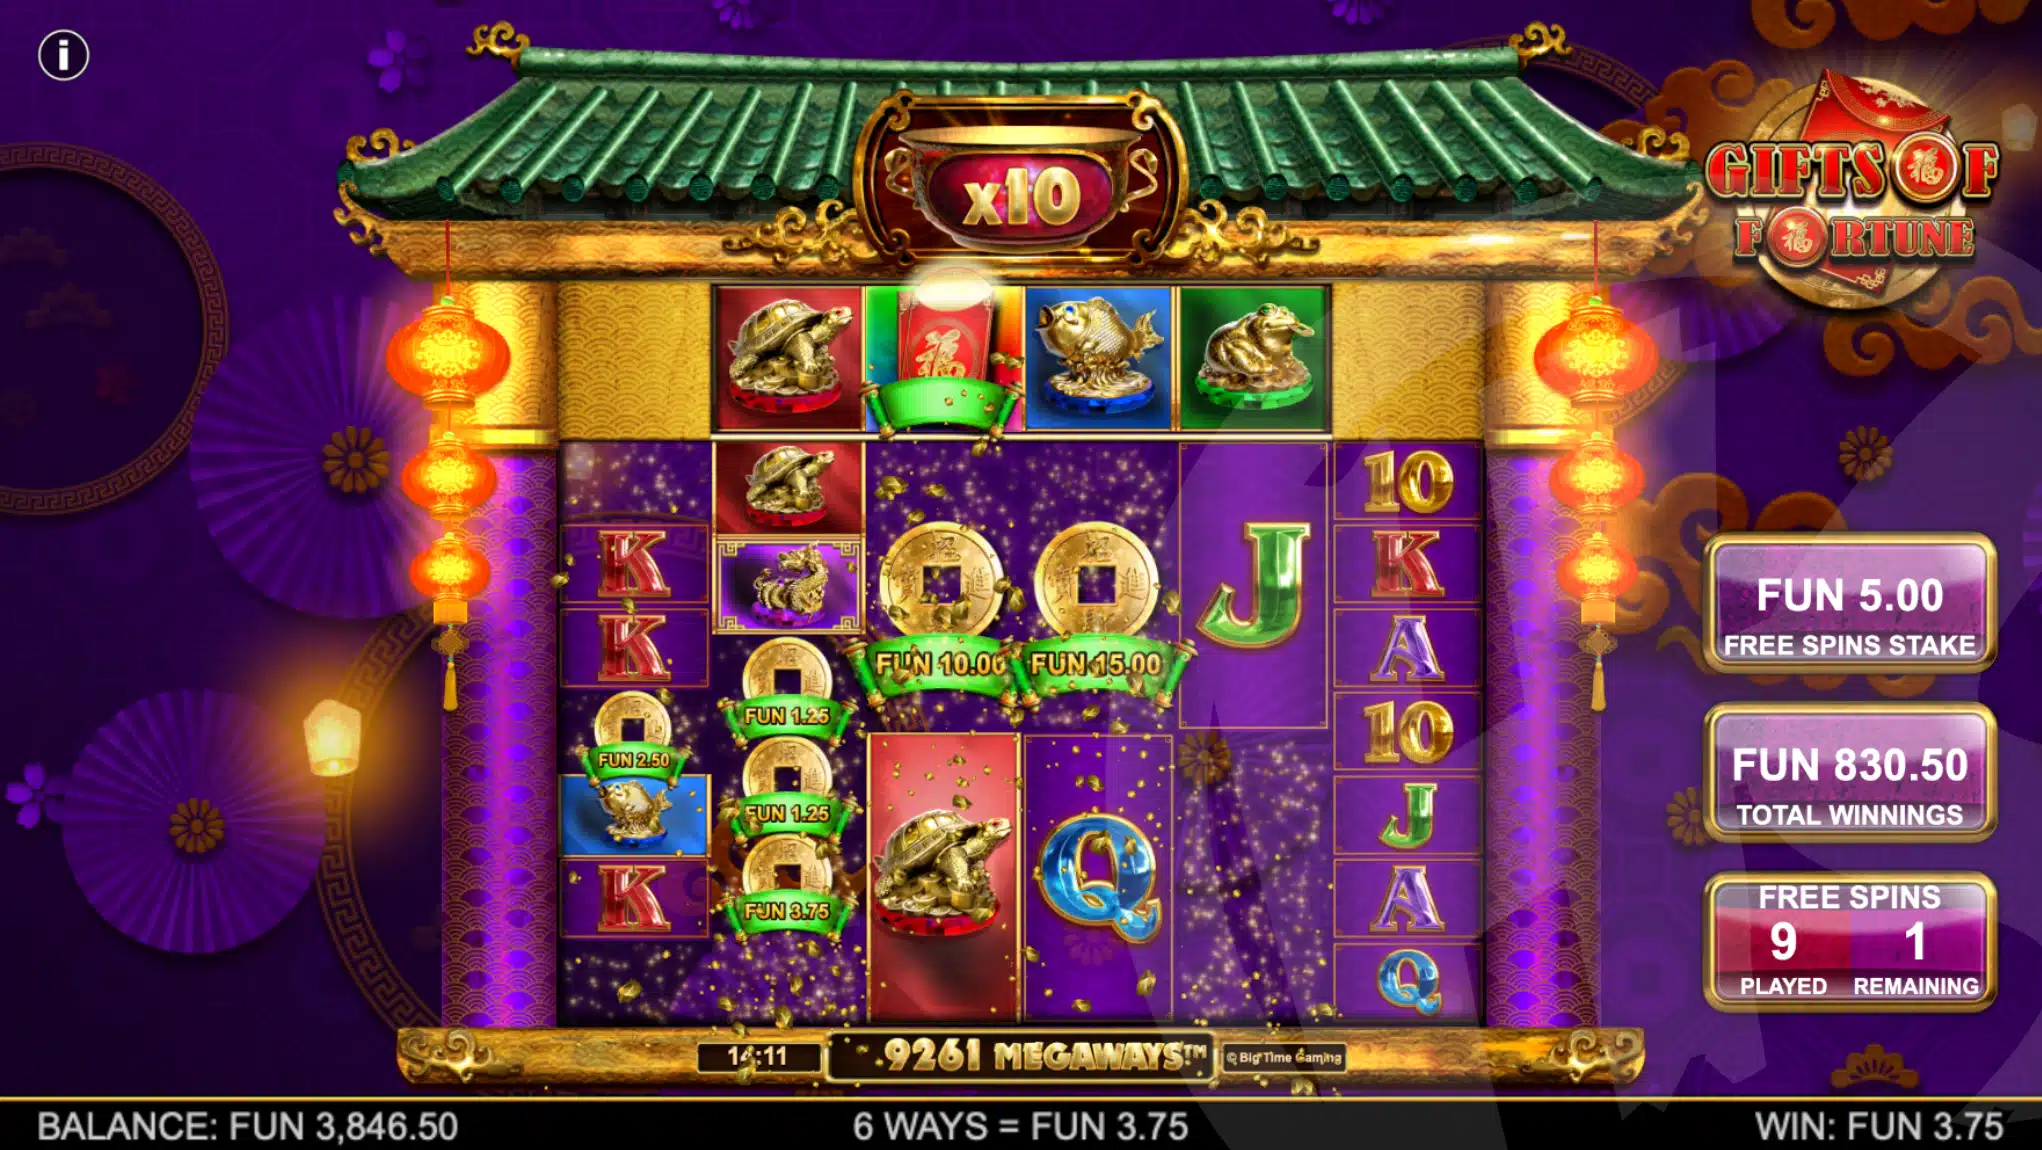 Enhanced Free Spins Guarantee At Least 1 Wild Red Packet Per Spin